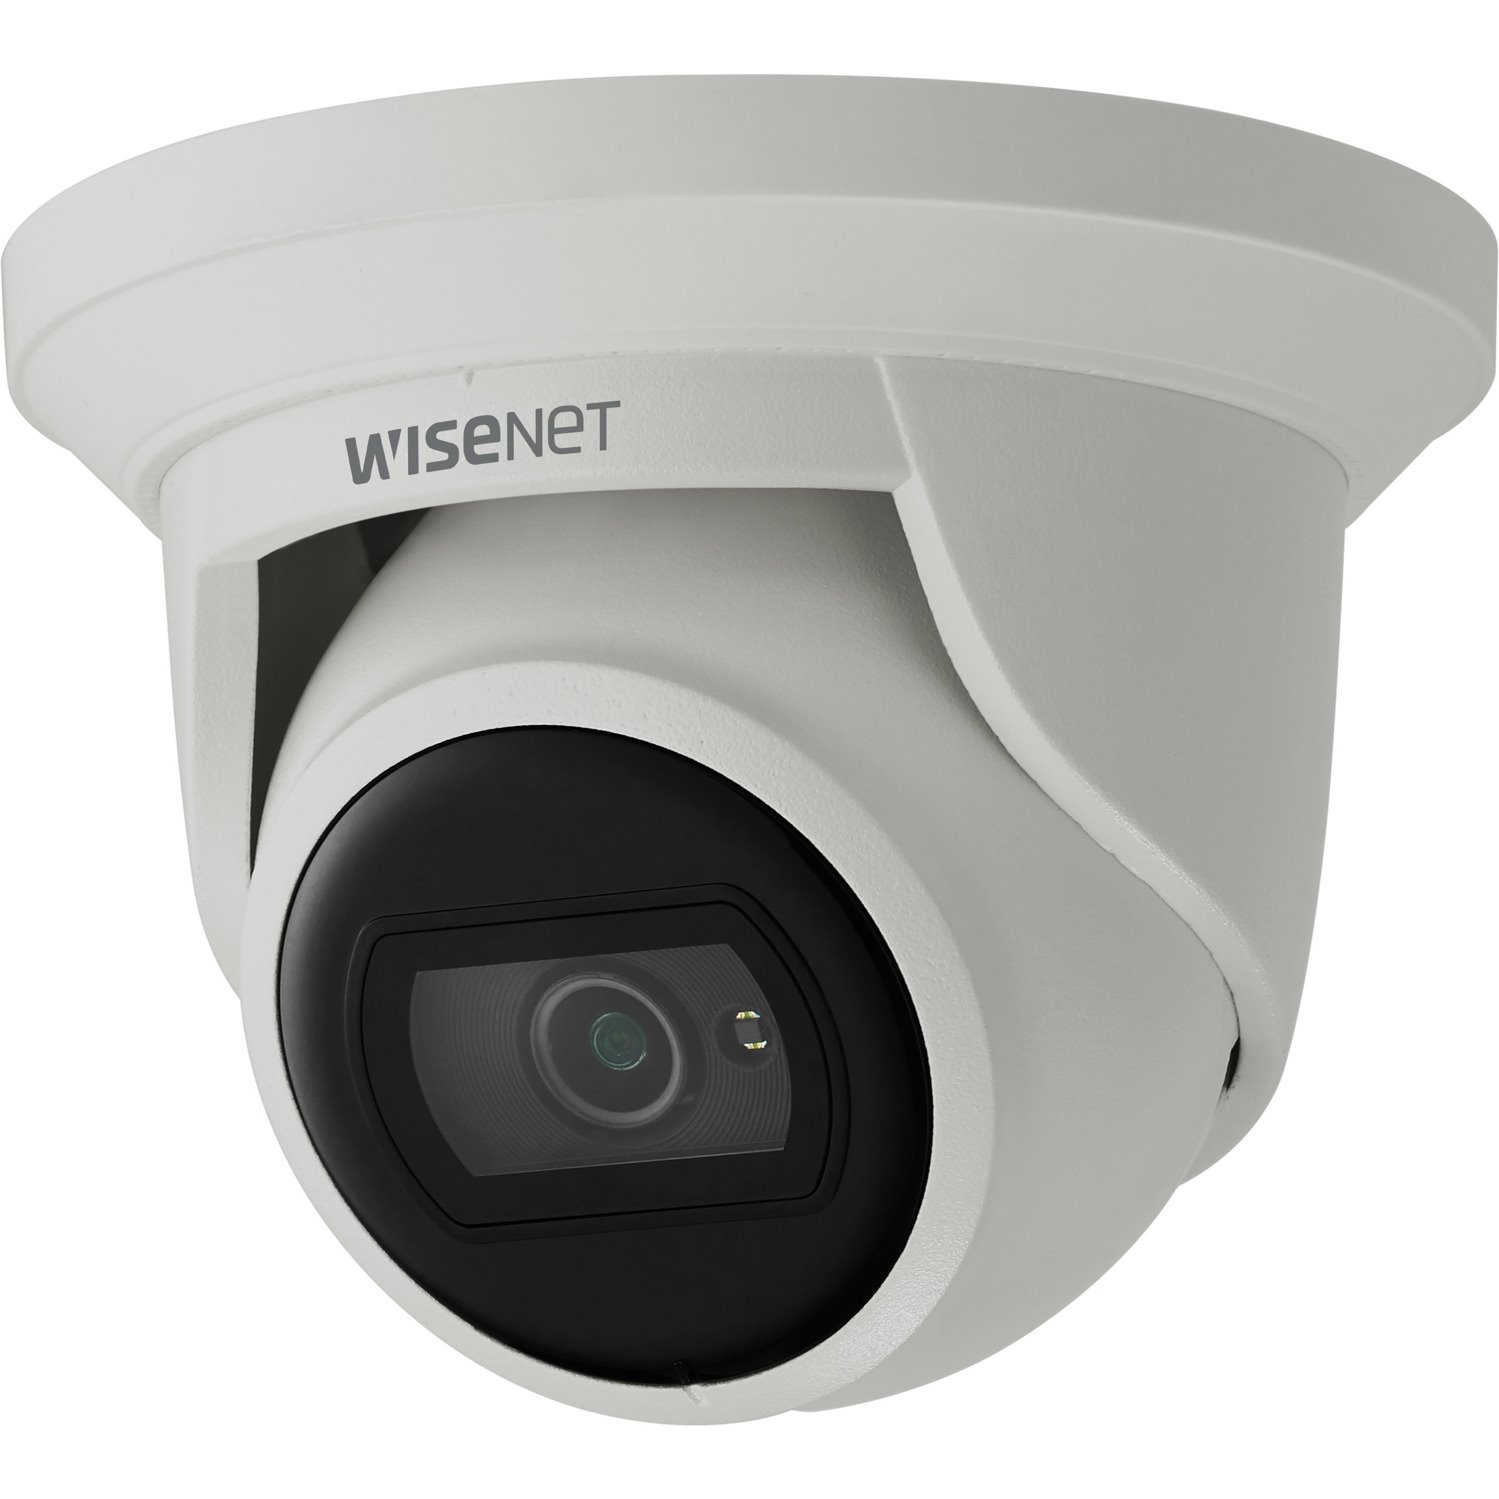 Wisenet QNE-8011R 5 Megapixel Outdoor Network Camera - Color - Dome - White